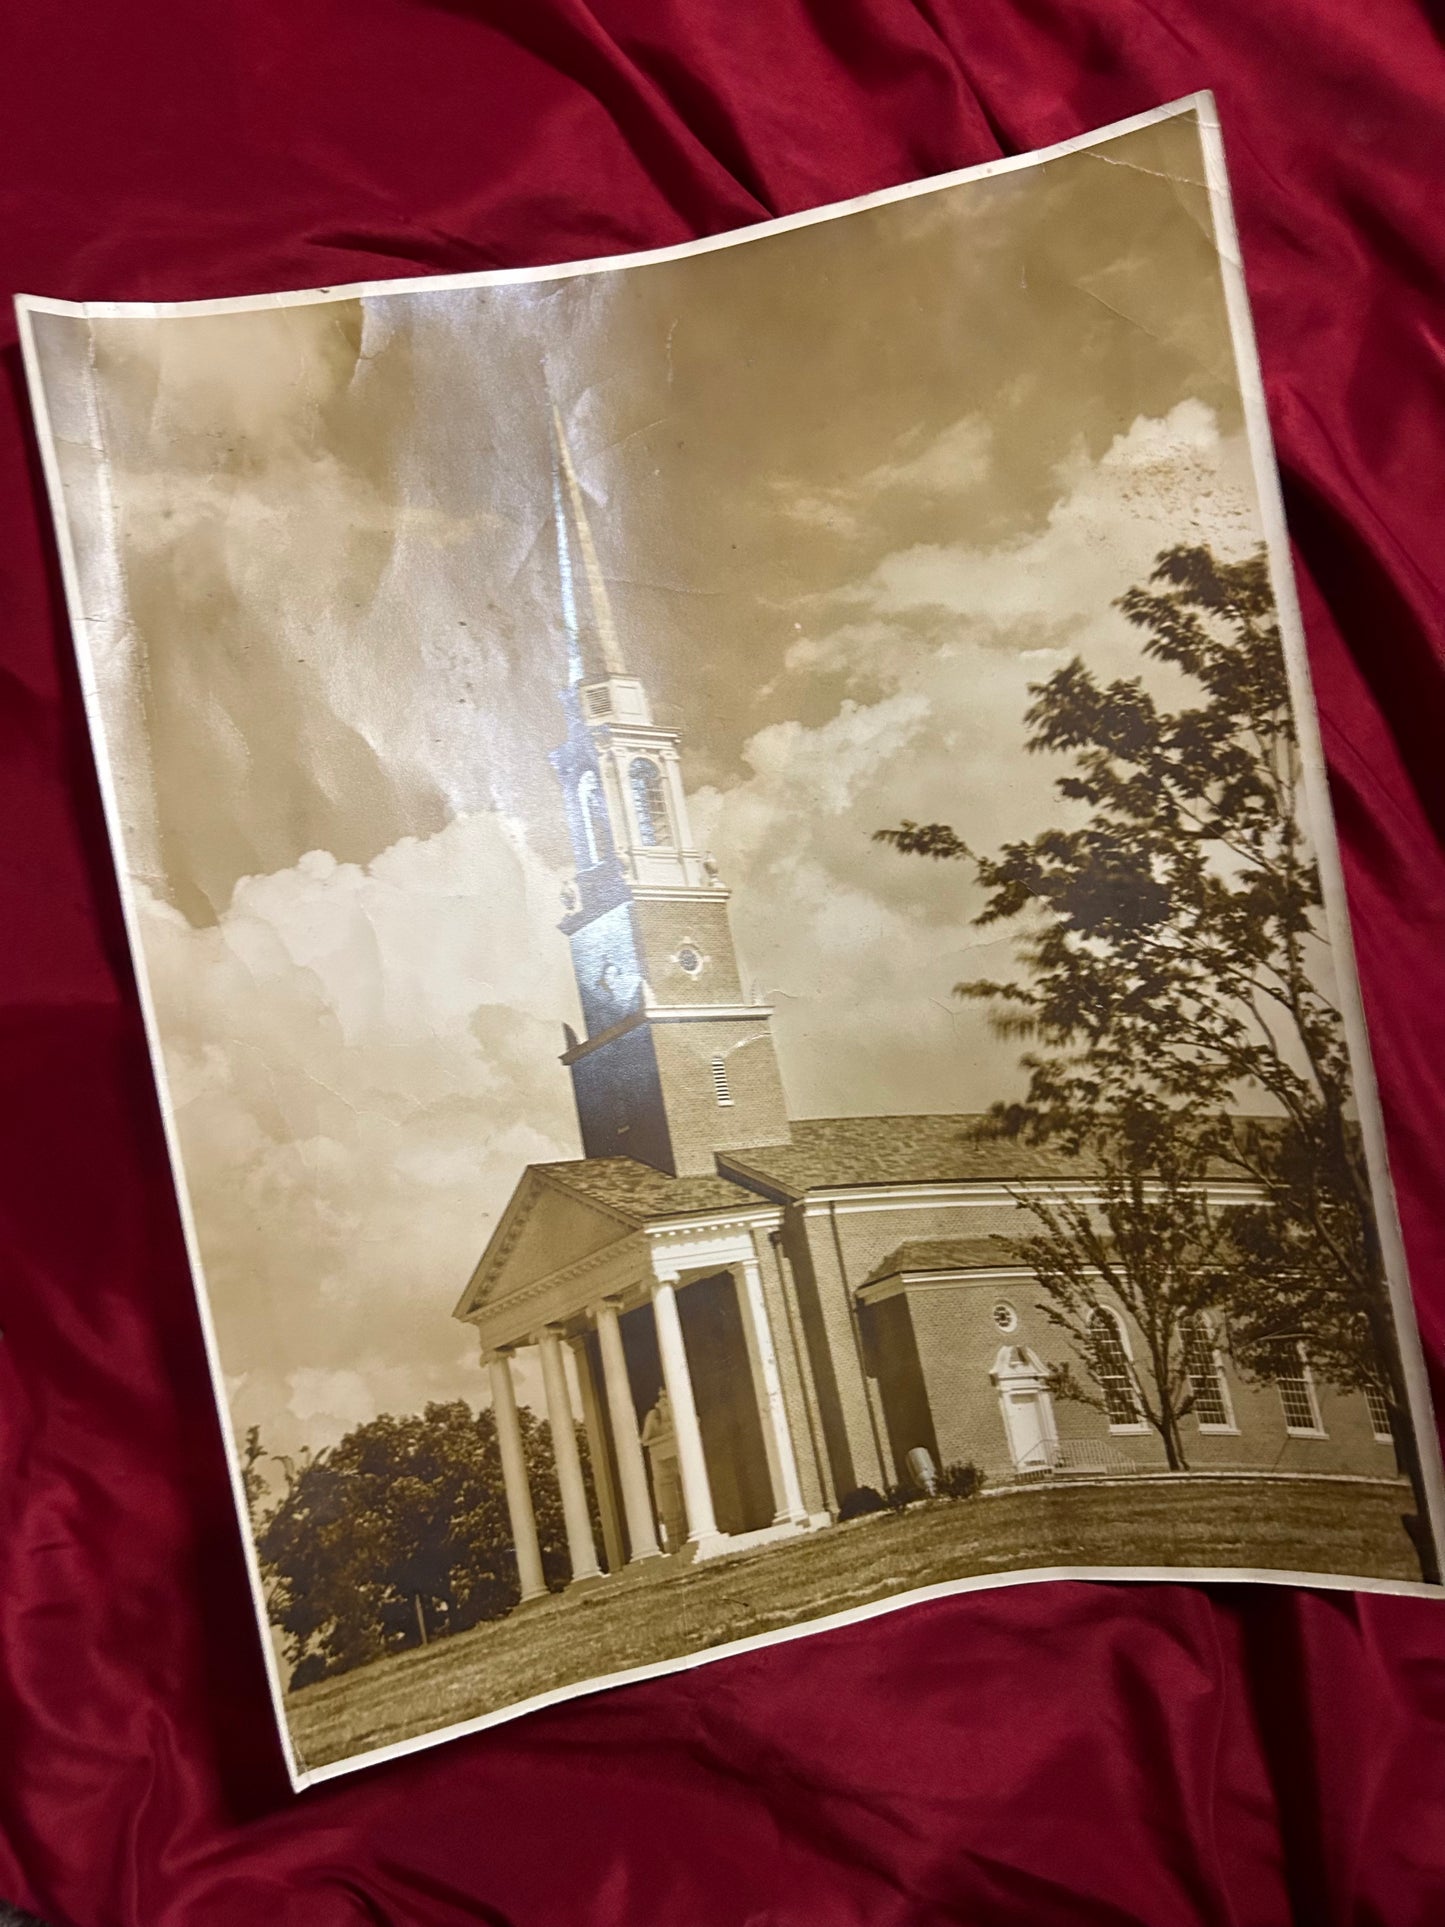 Large Photo of a Church